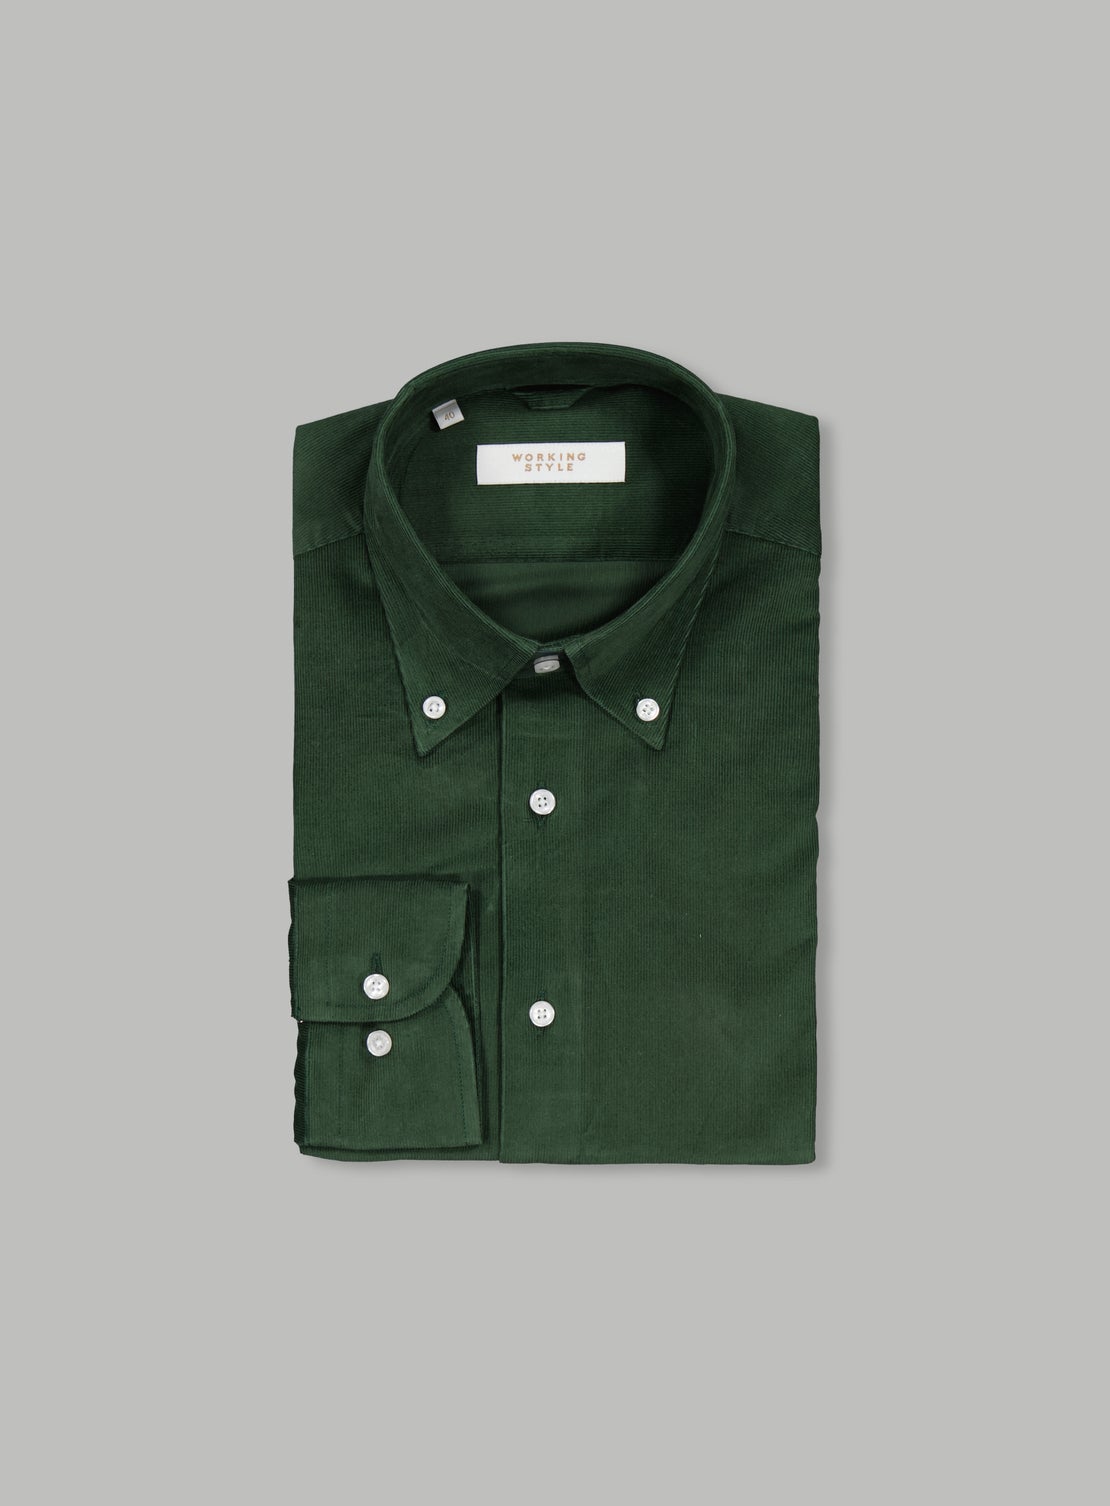 Willy Green Cord Shirt